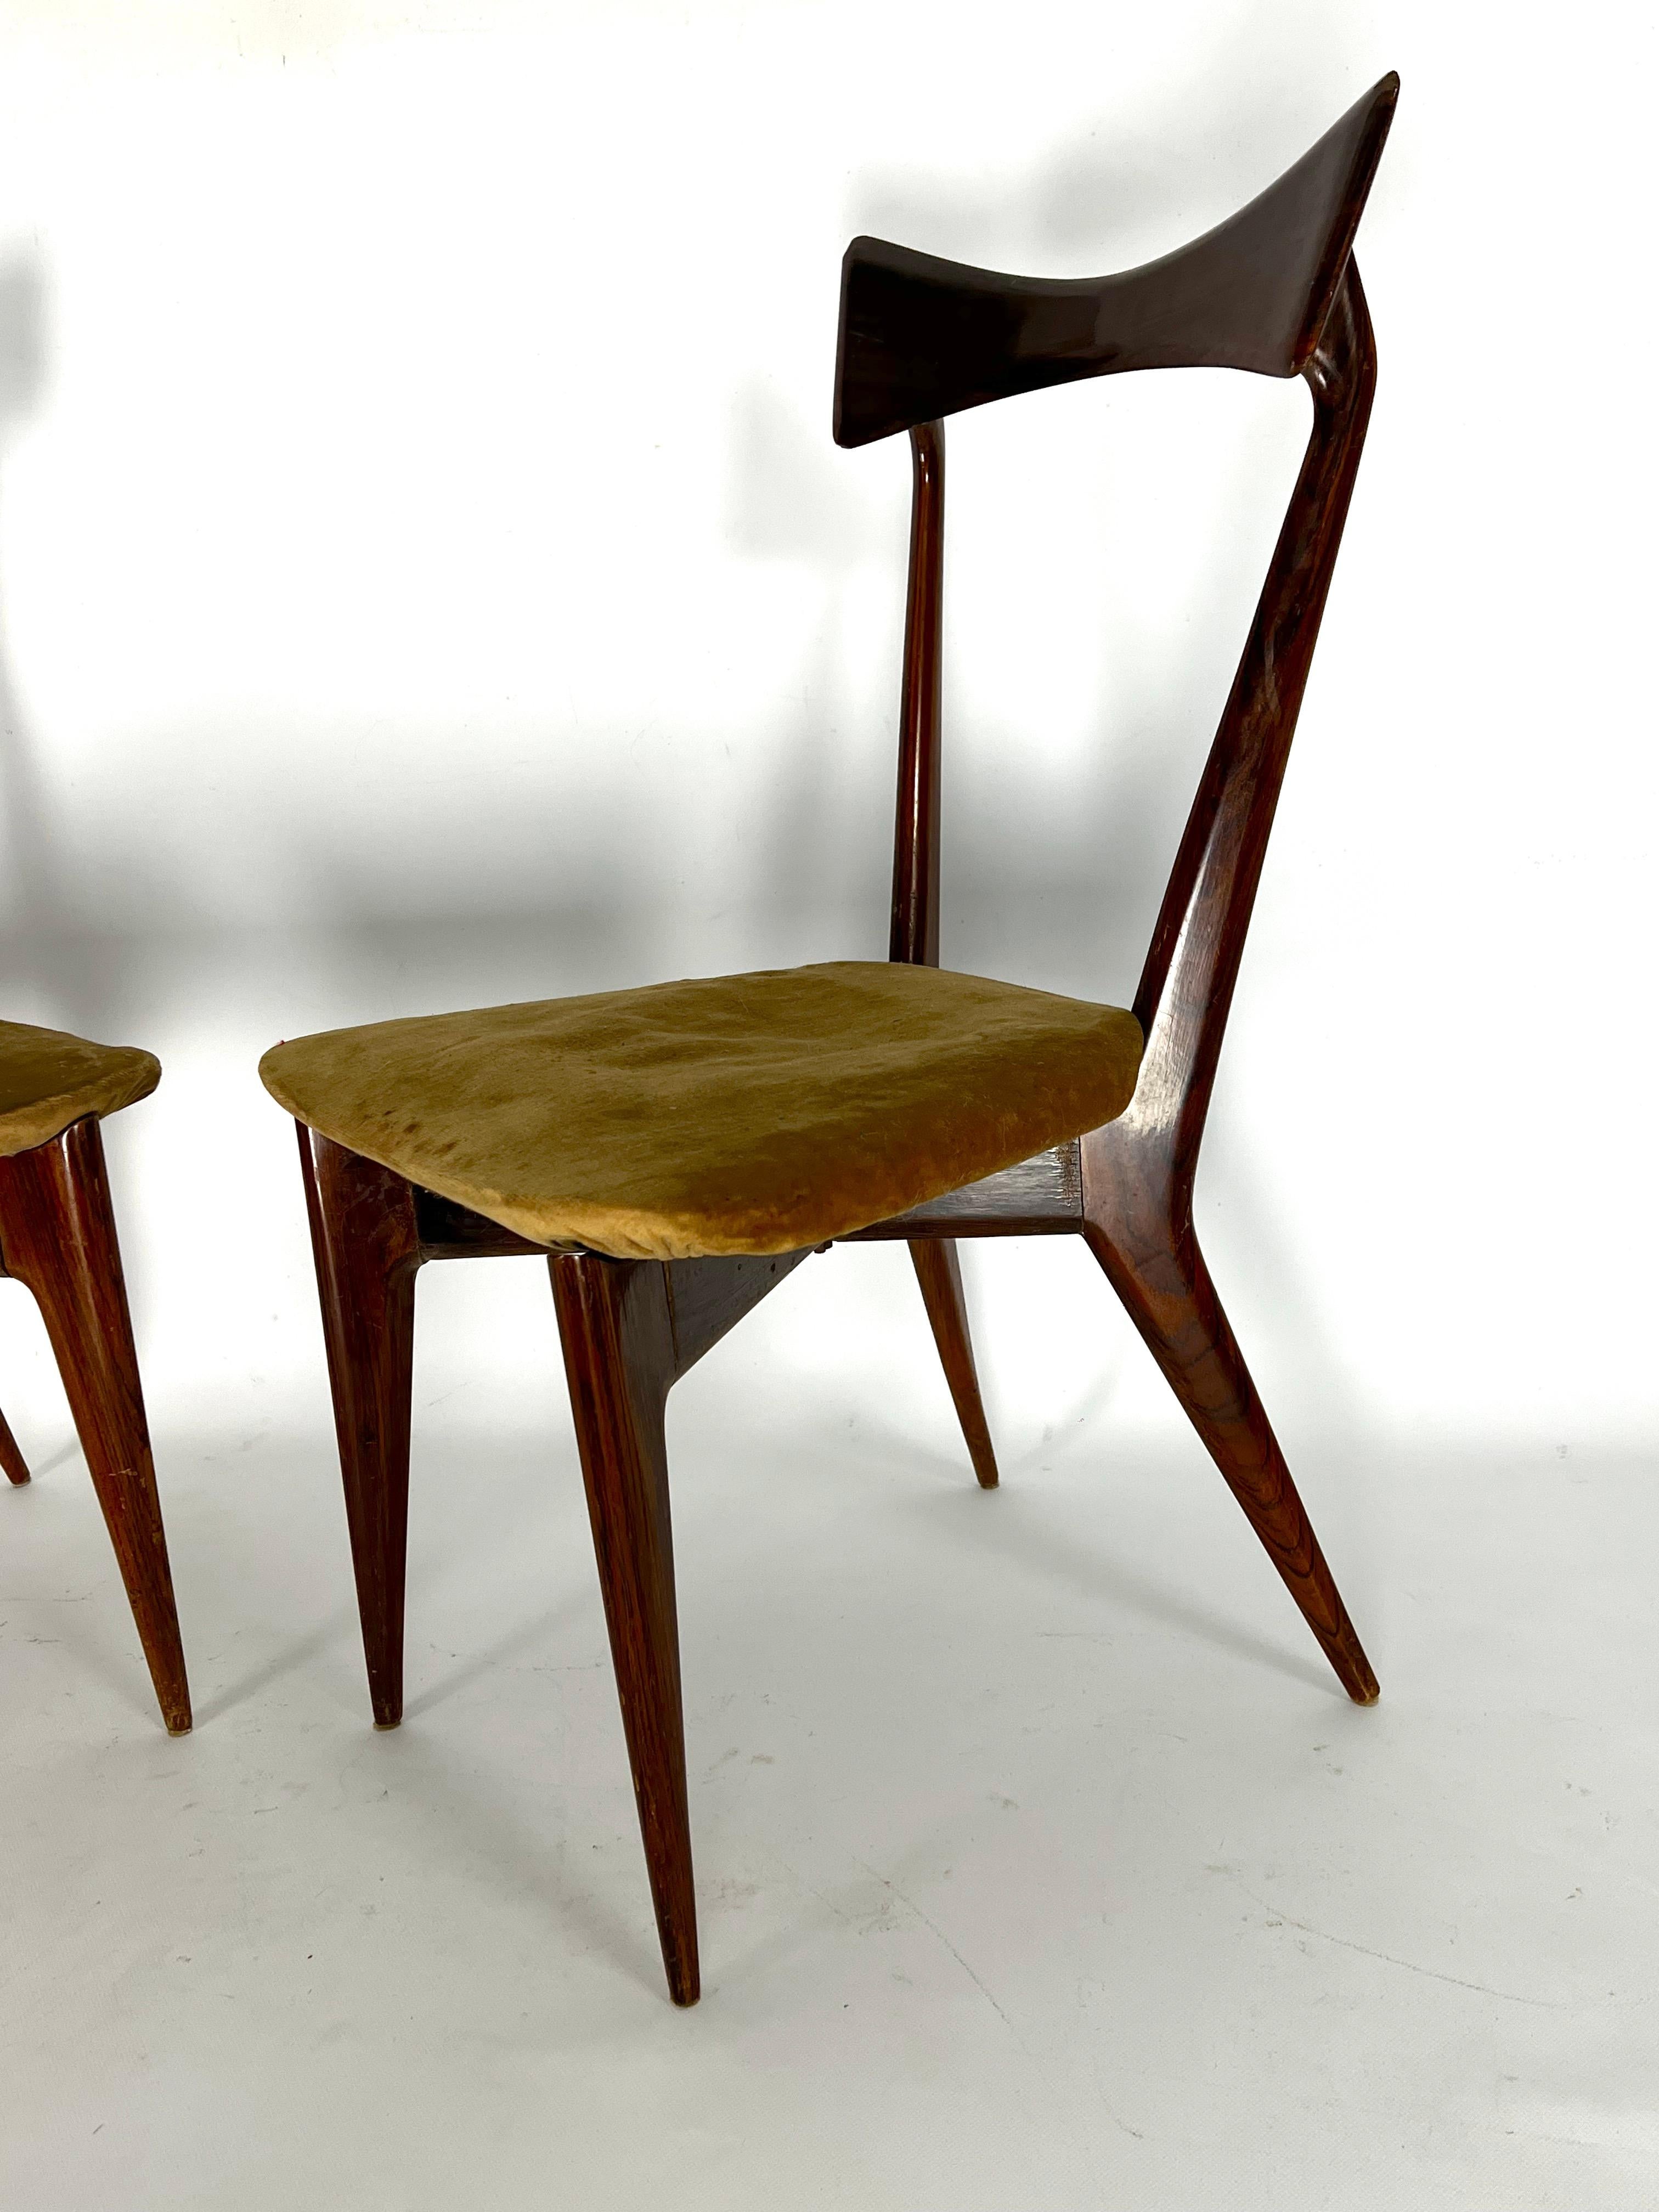 Wood Ico Parisi, set of five Butterfly chairs for Ariberto Colombo. Italy 1950s For Sale